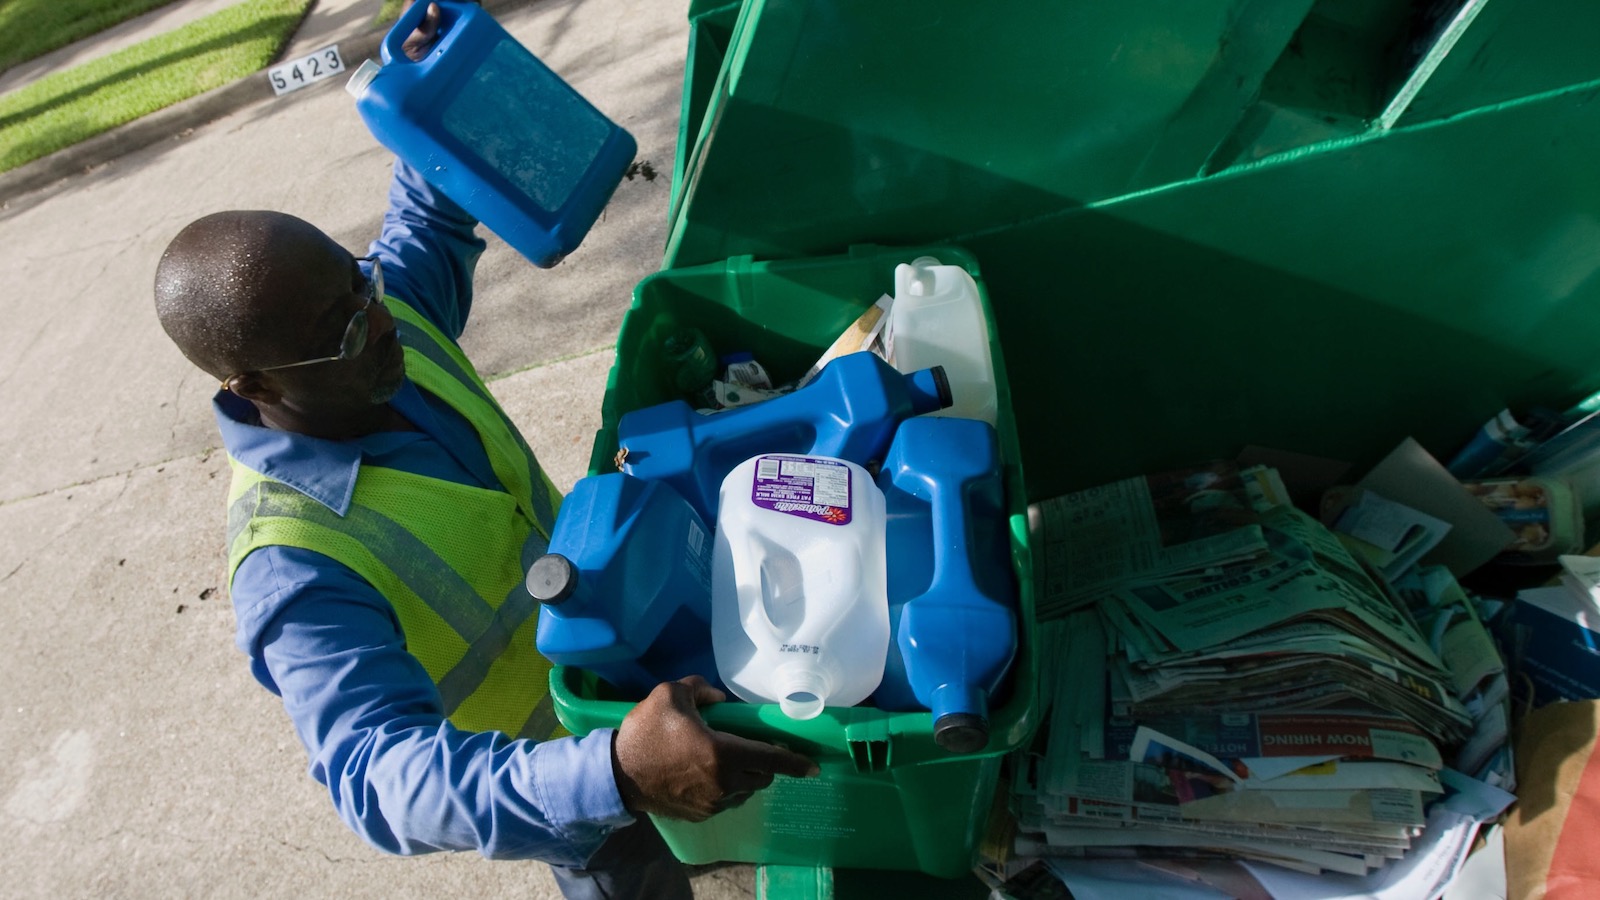 A city employee tosses an assortment of plastic containers into a curbside recycling truck in Houston, Texas.